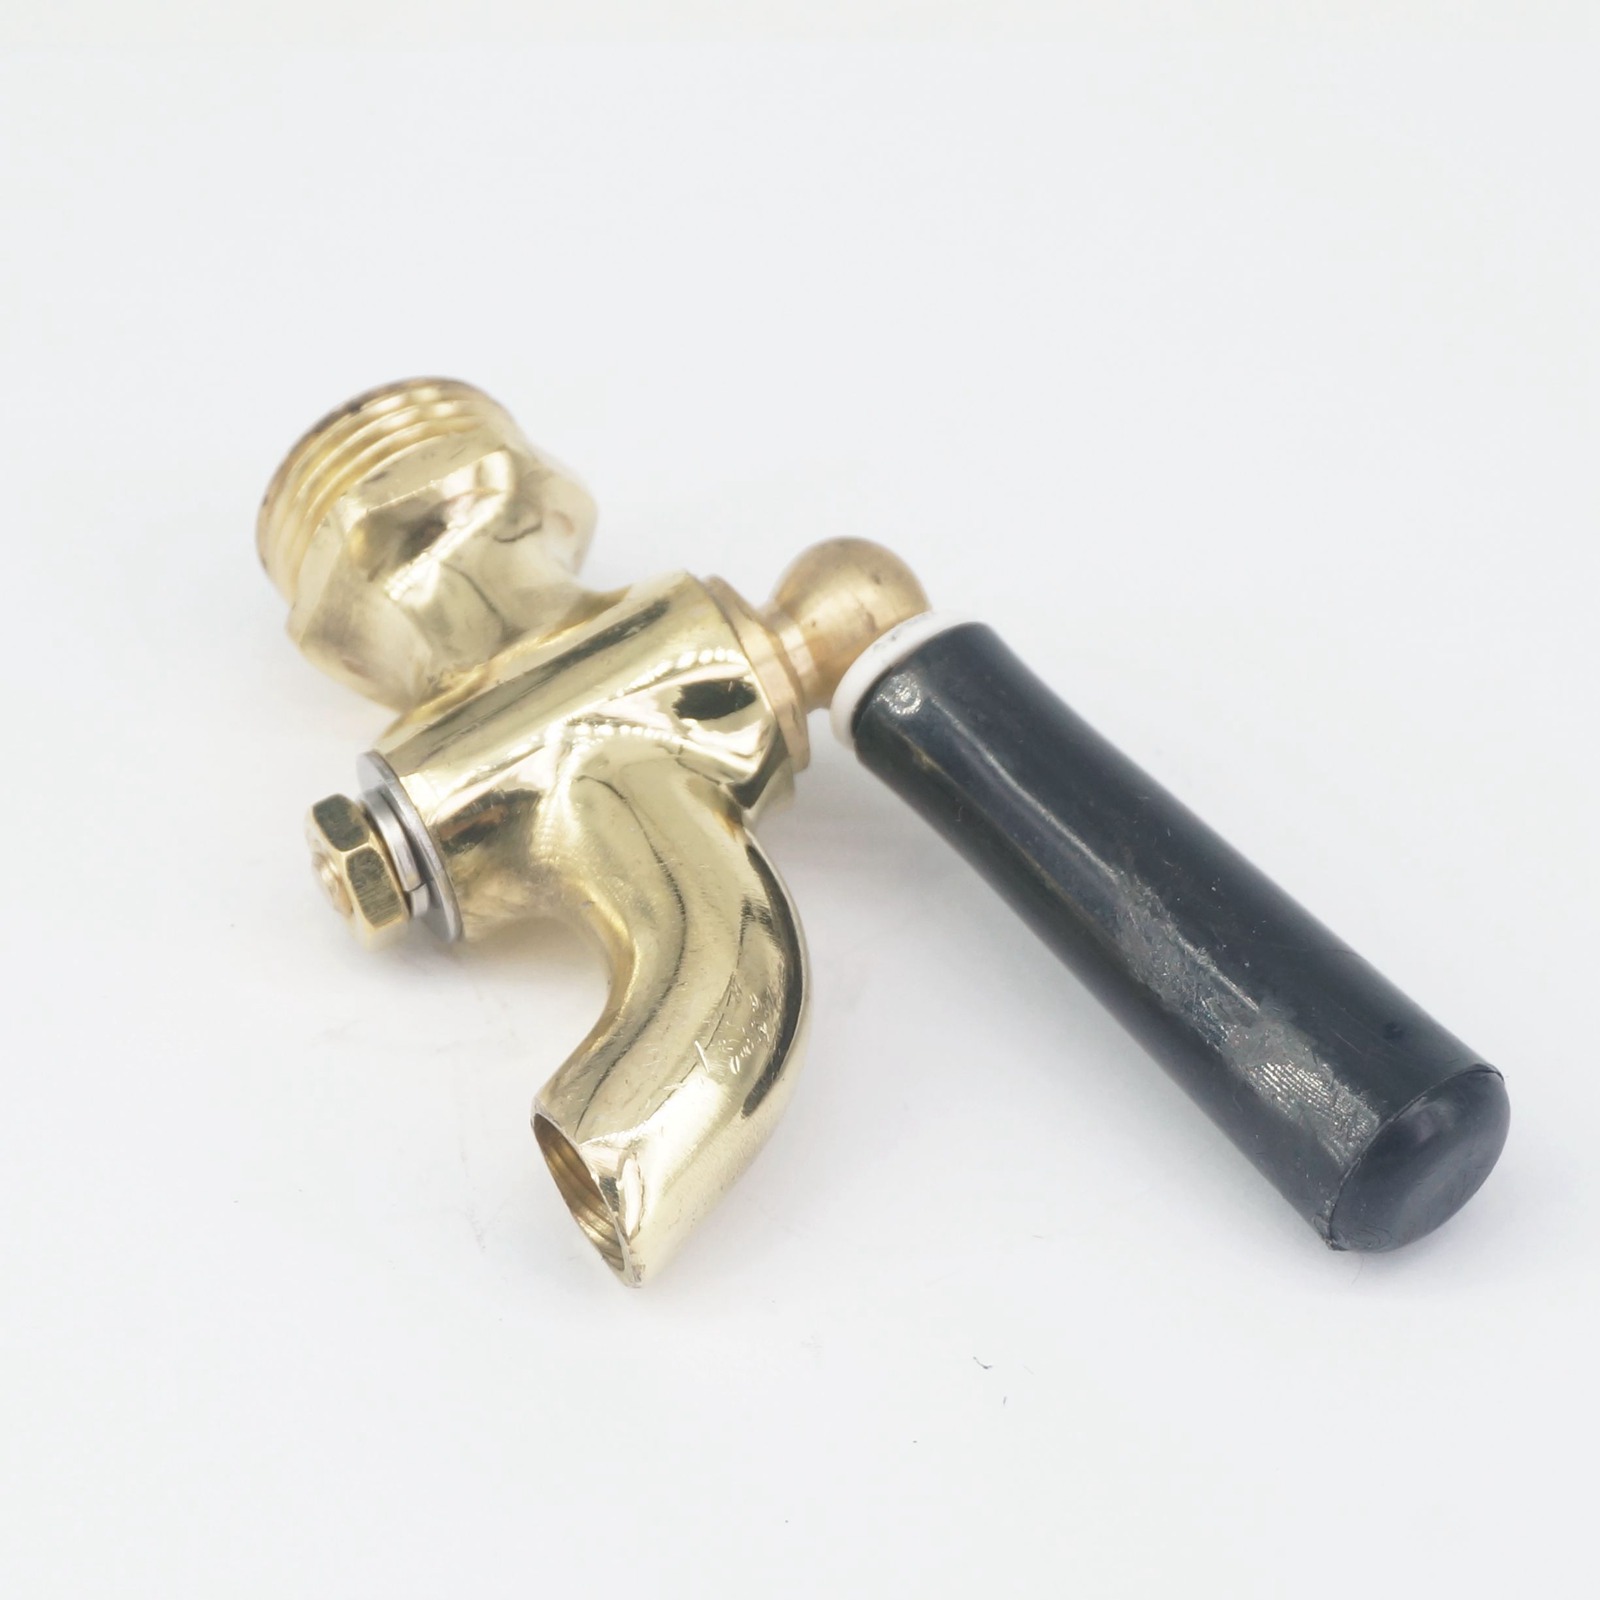 1 2 Bsp Male Small Type Hot Water Tap Antique Brass Handle Faucet